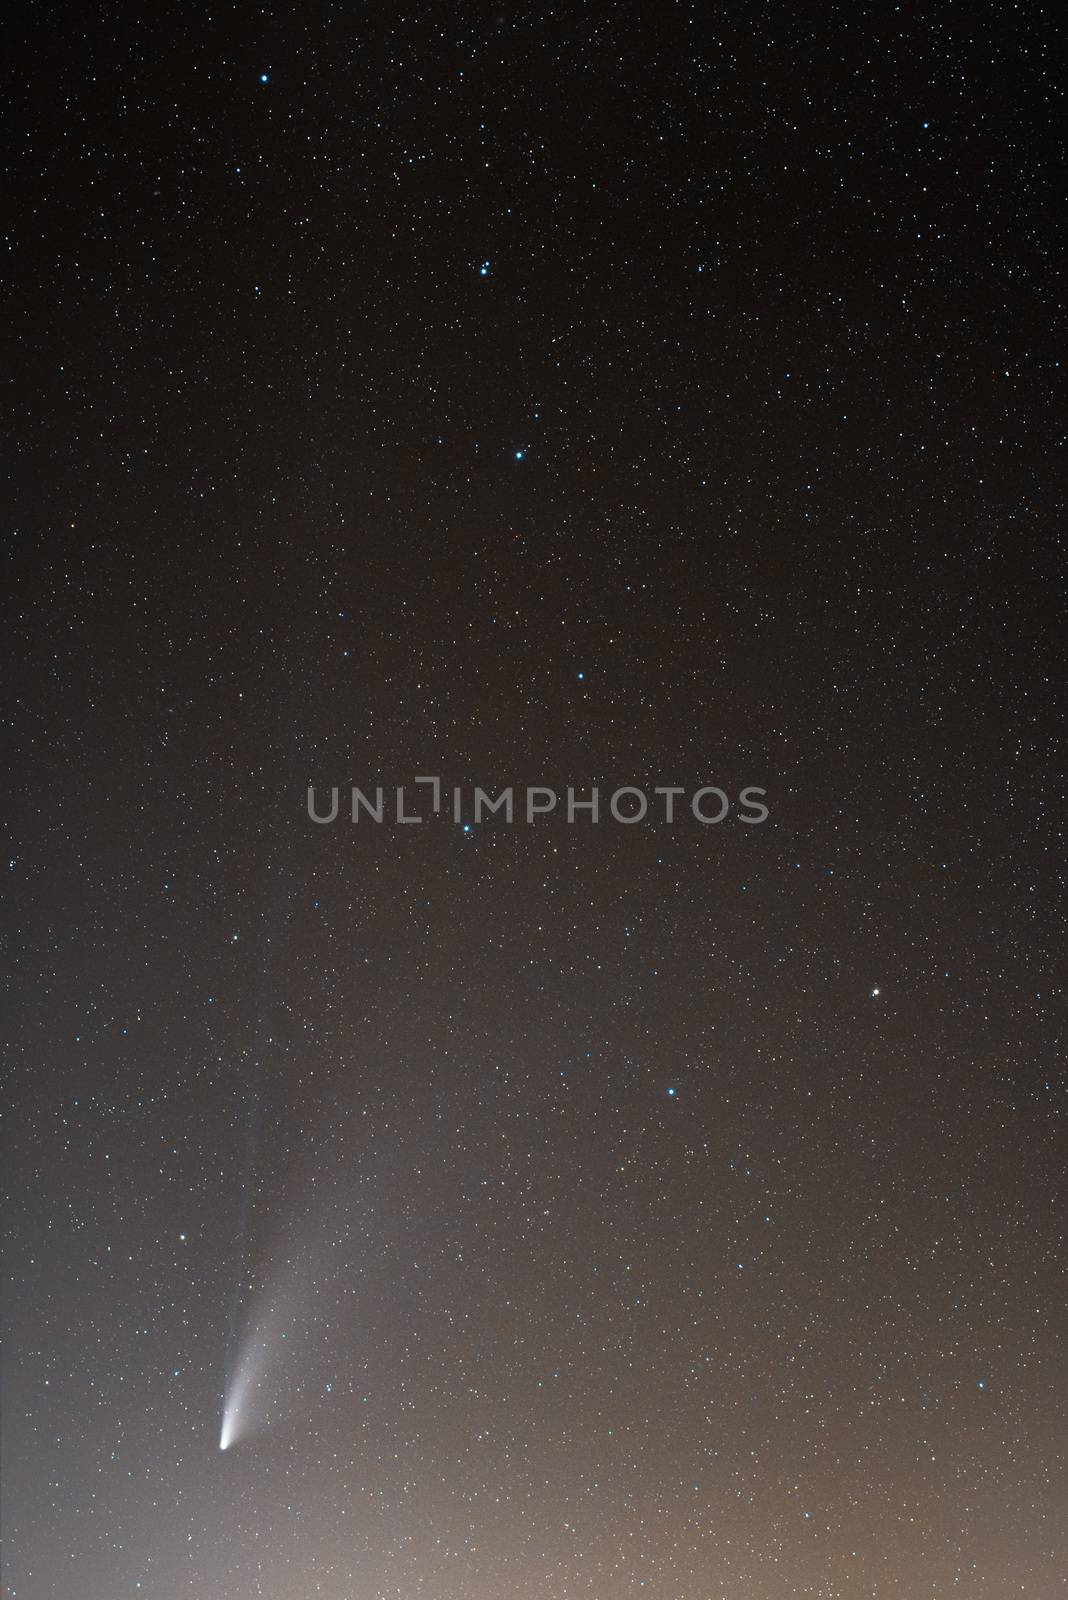 Neowise Comet and its two long tails below Ursa Major constellation by mauricallari